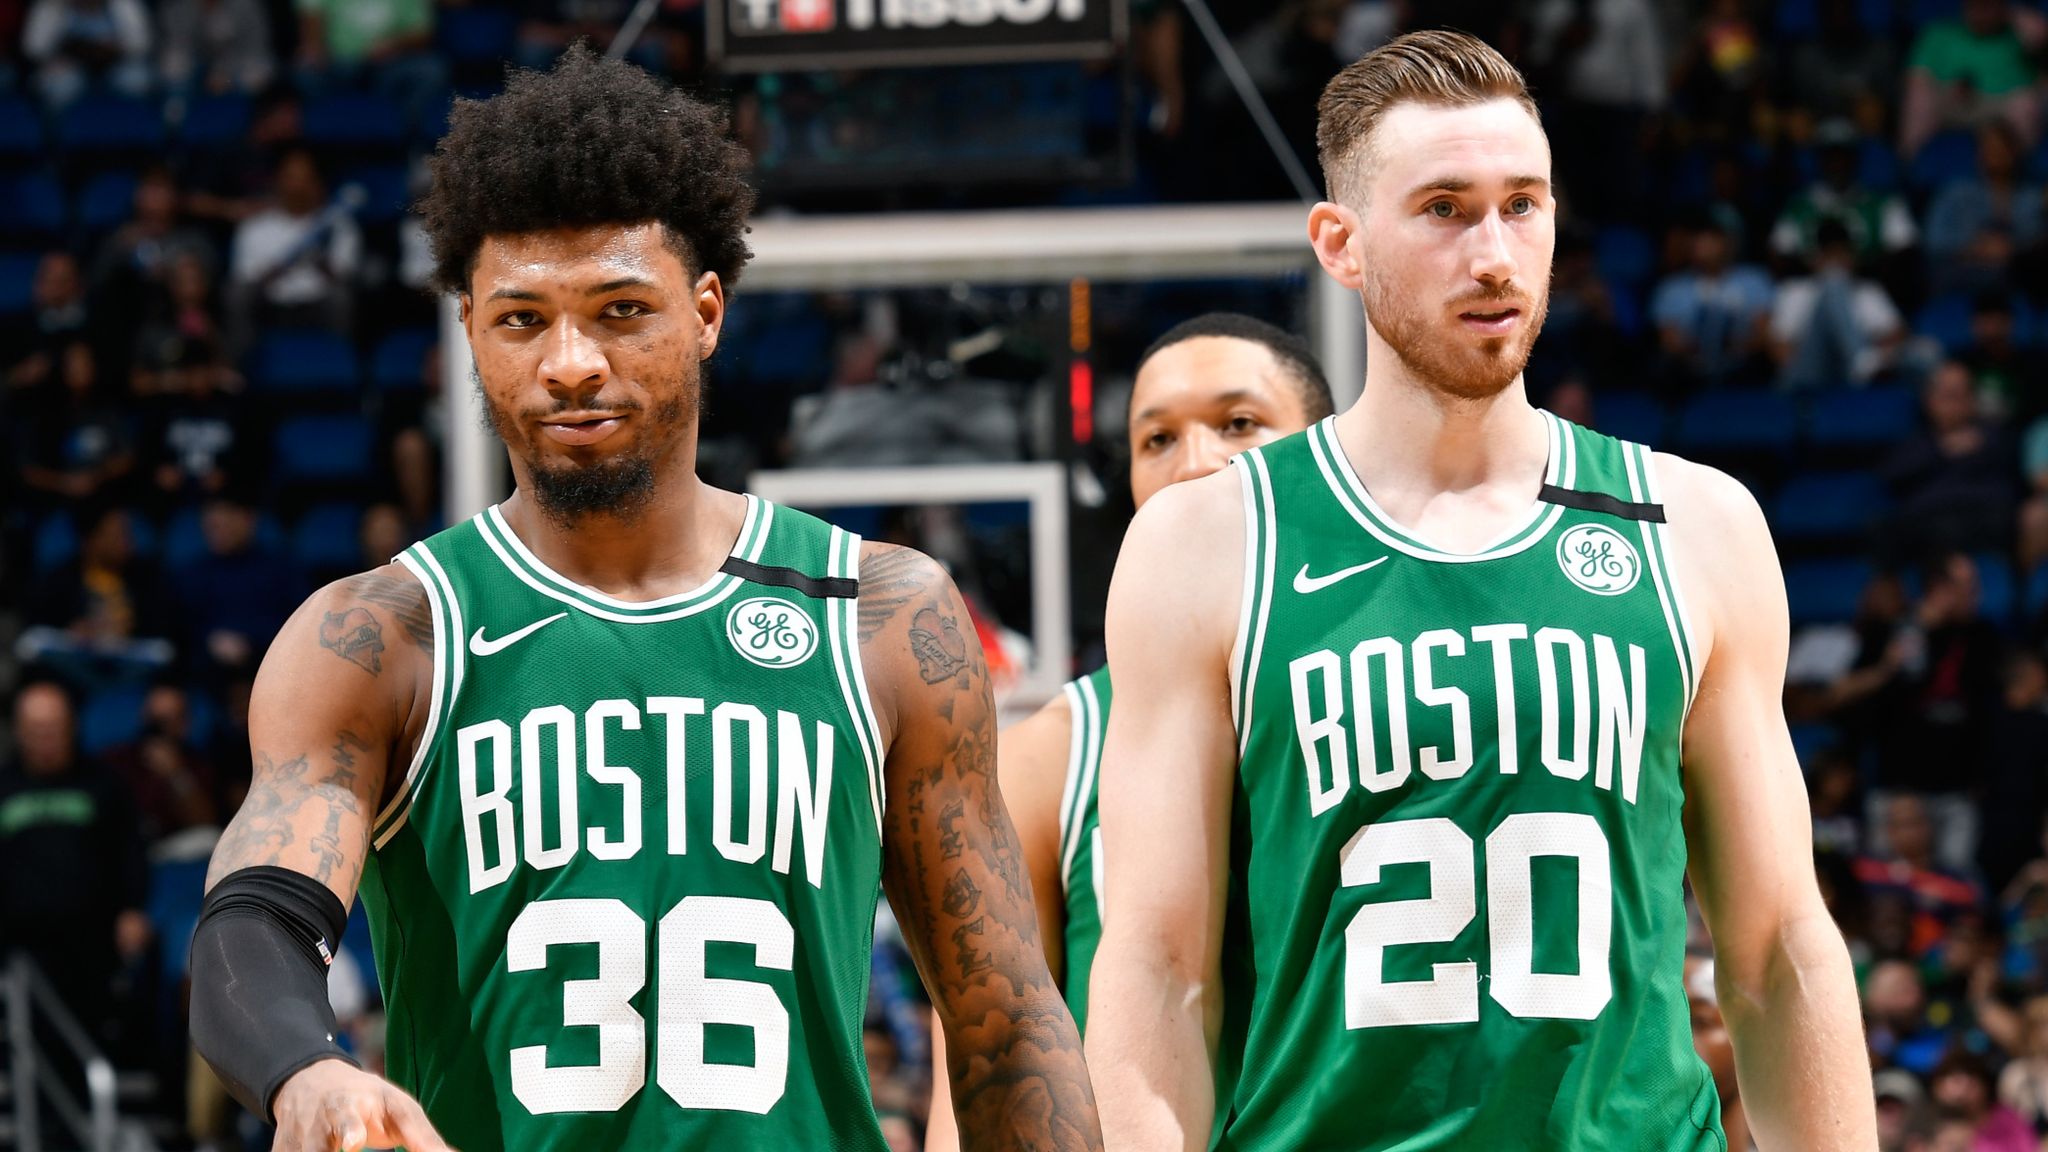 Boston Celtics: Hayward is playing like the star he was brought in to be